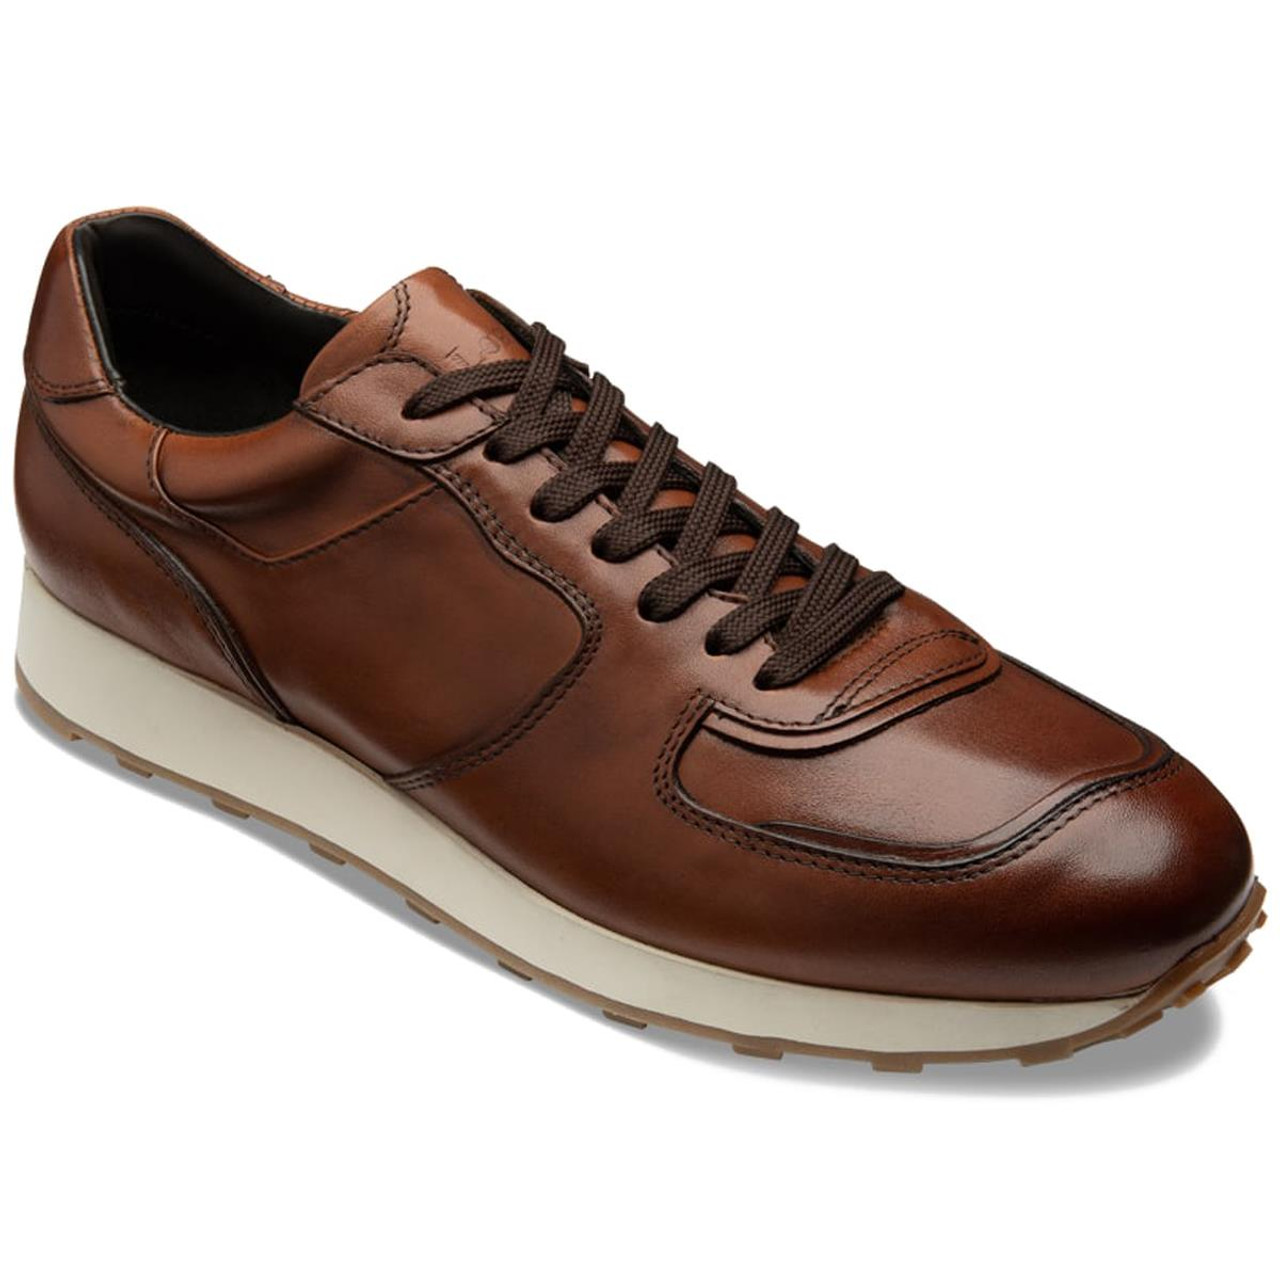 What is the ideal use for Loake trainers?